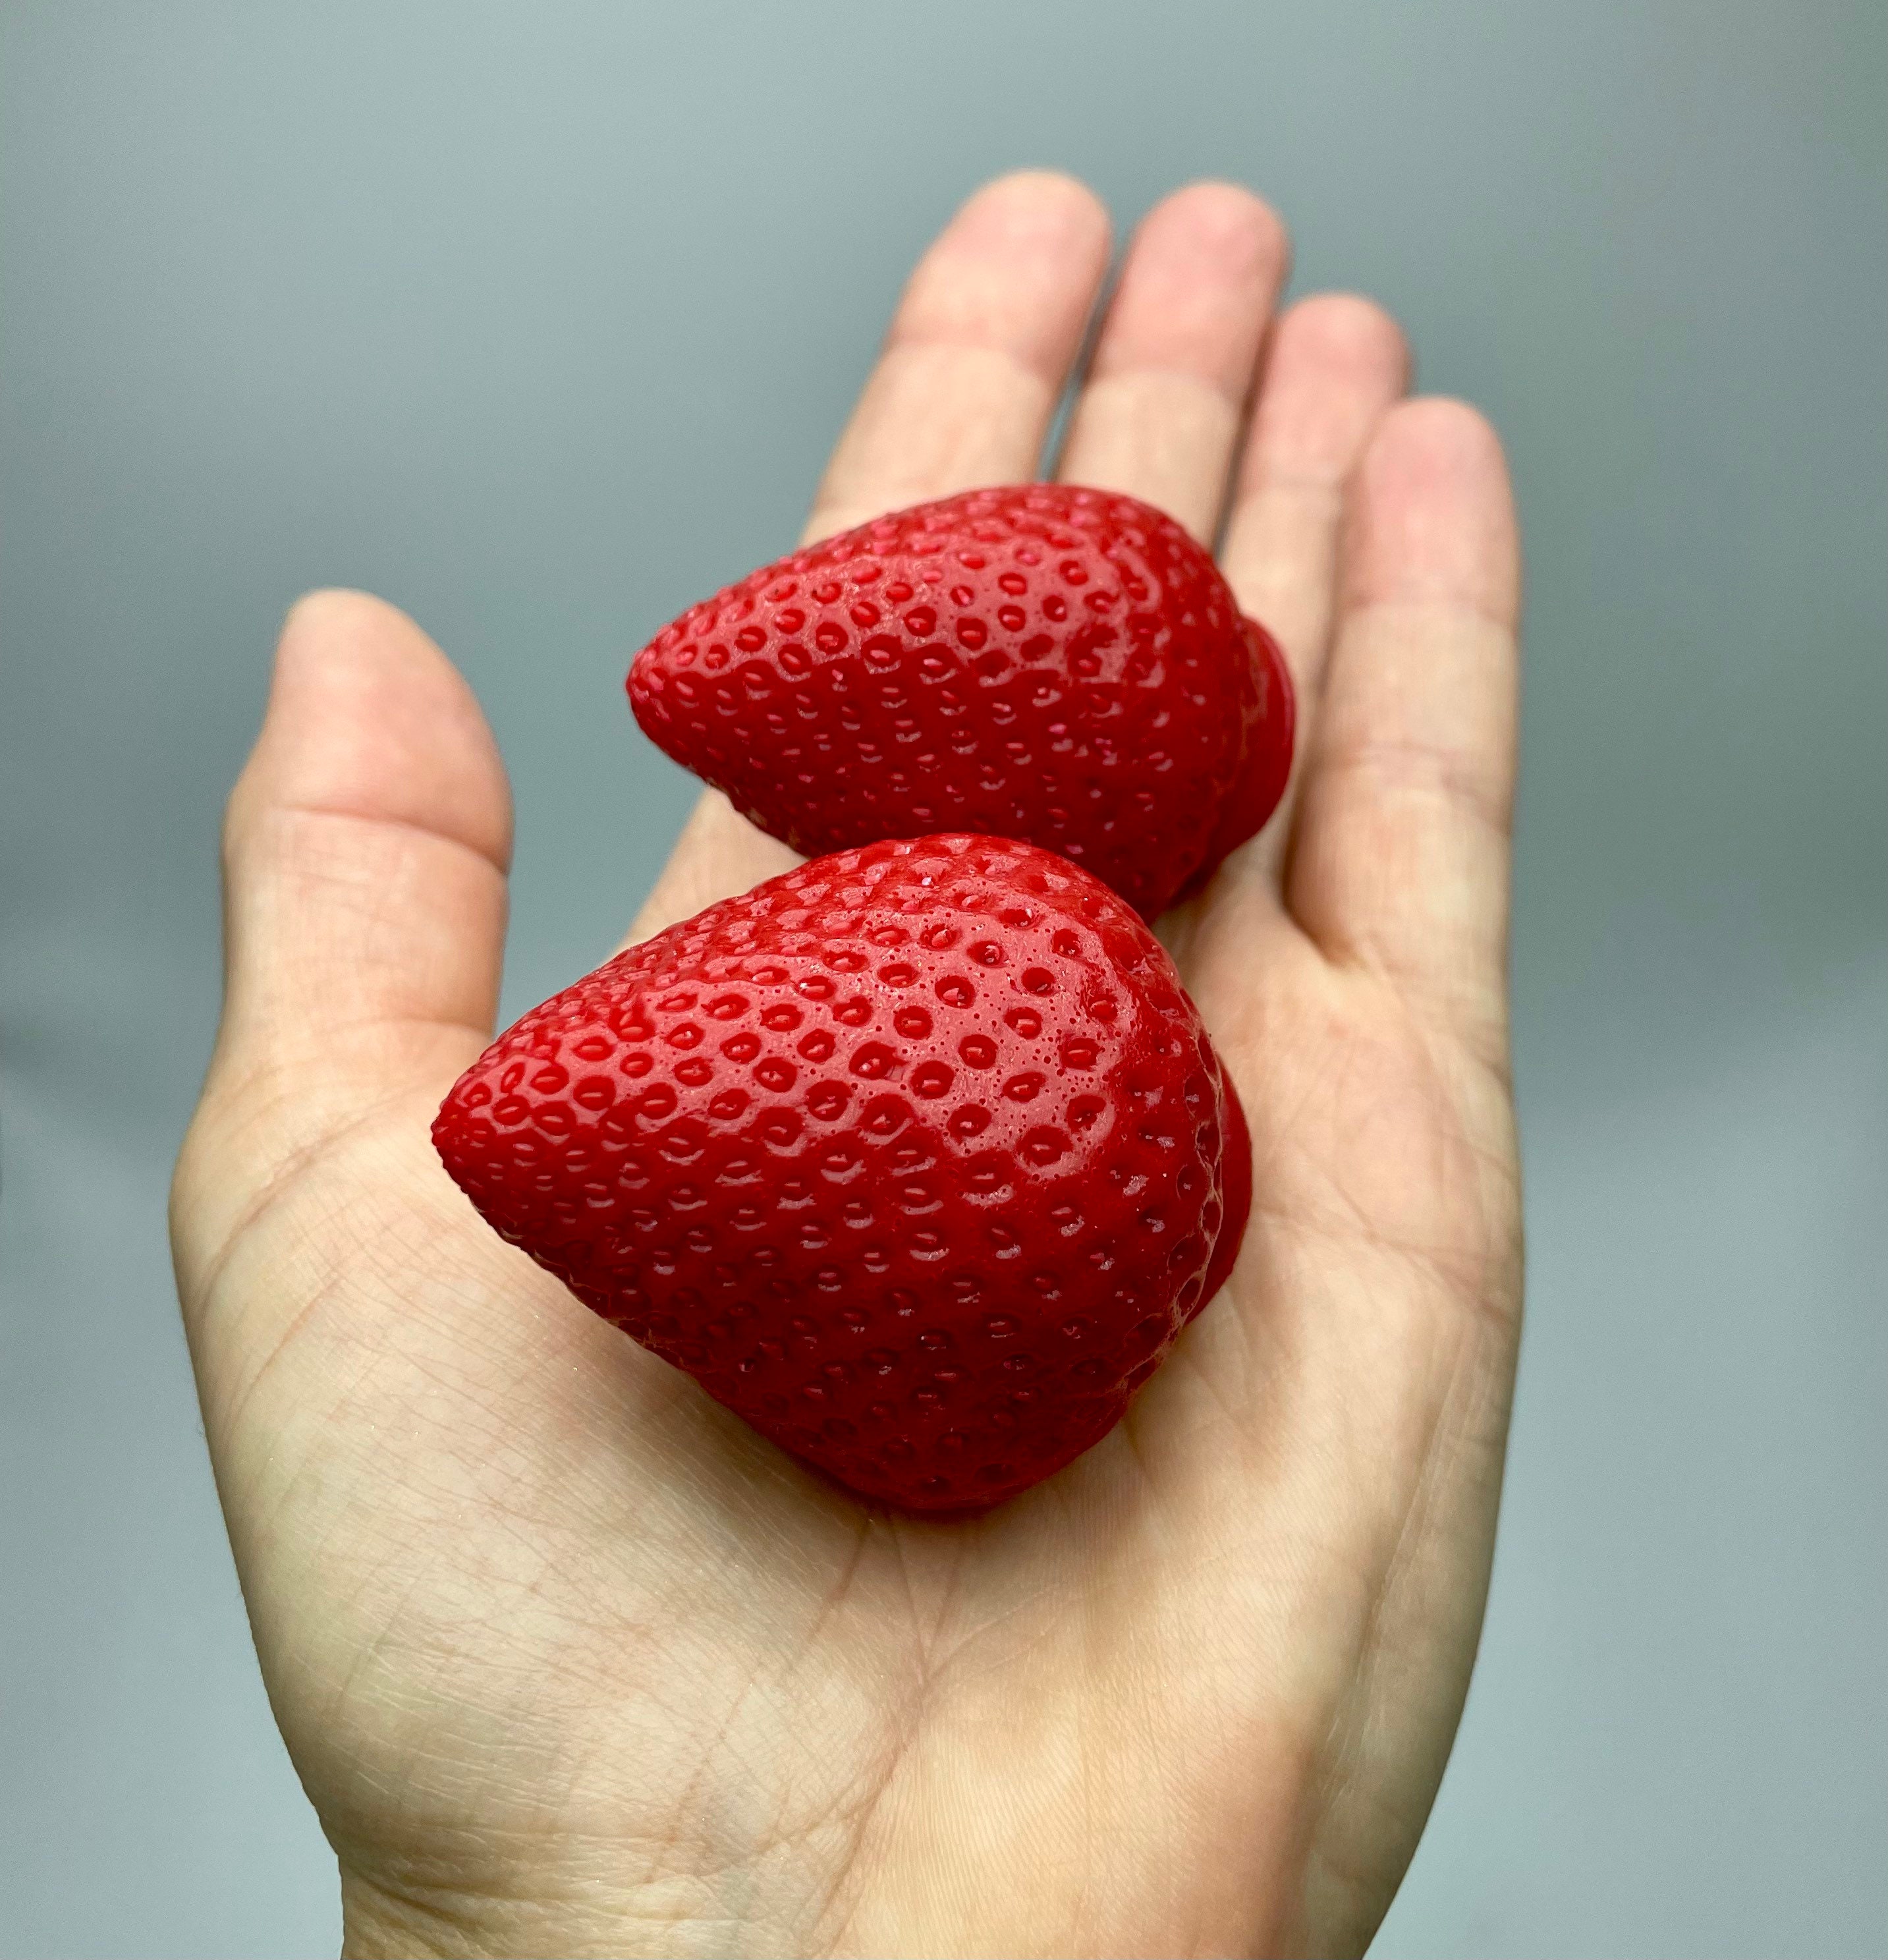 How to create realistic strawberries with a silicone mold 